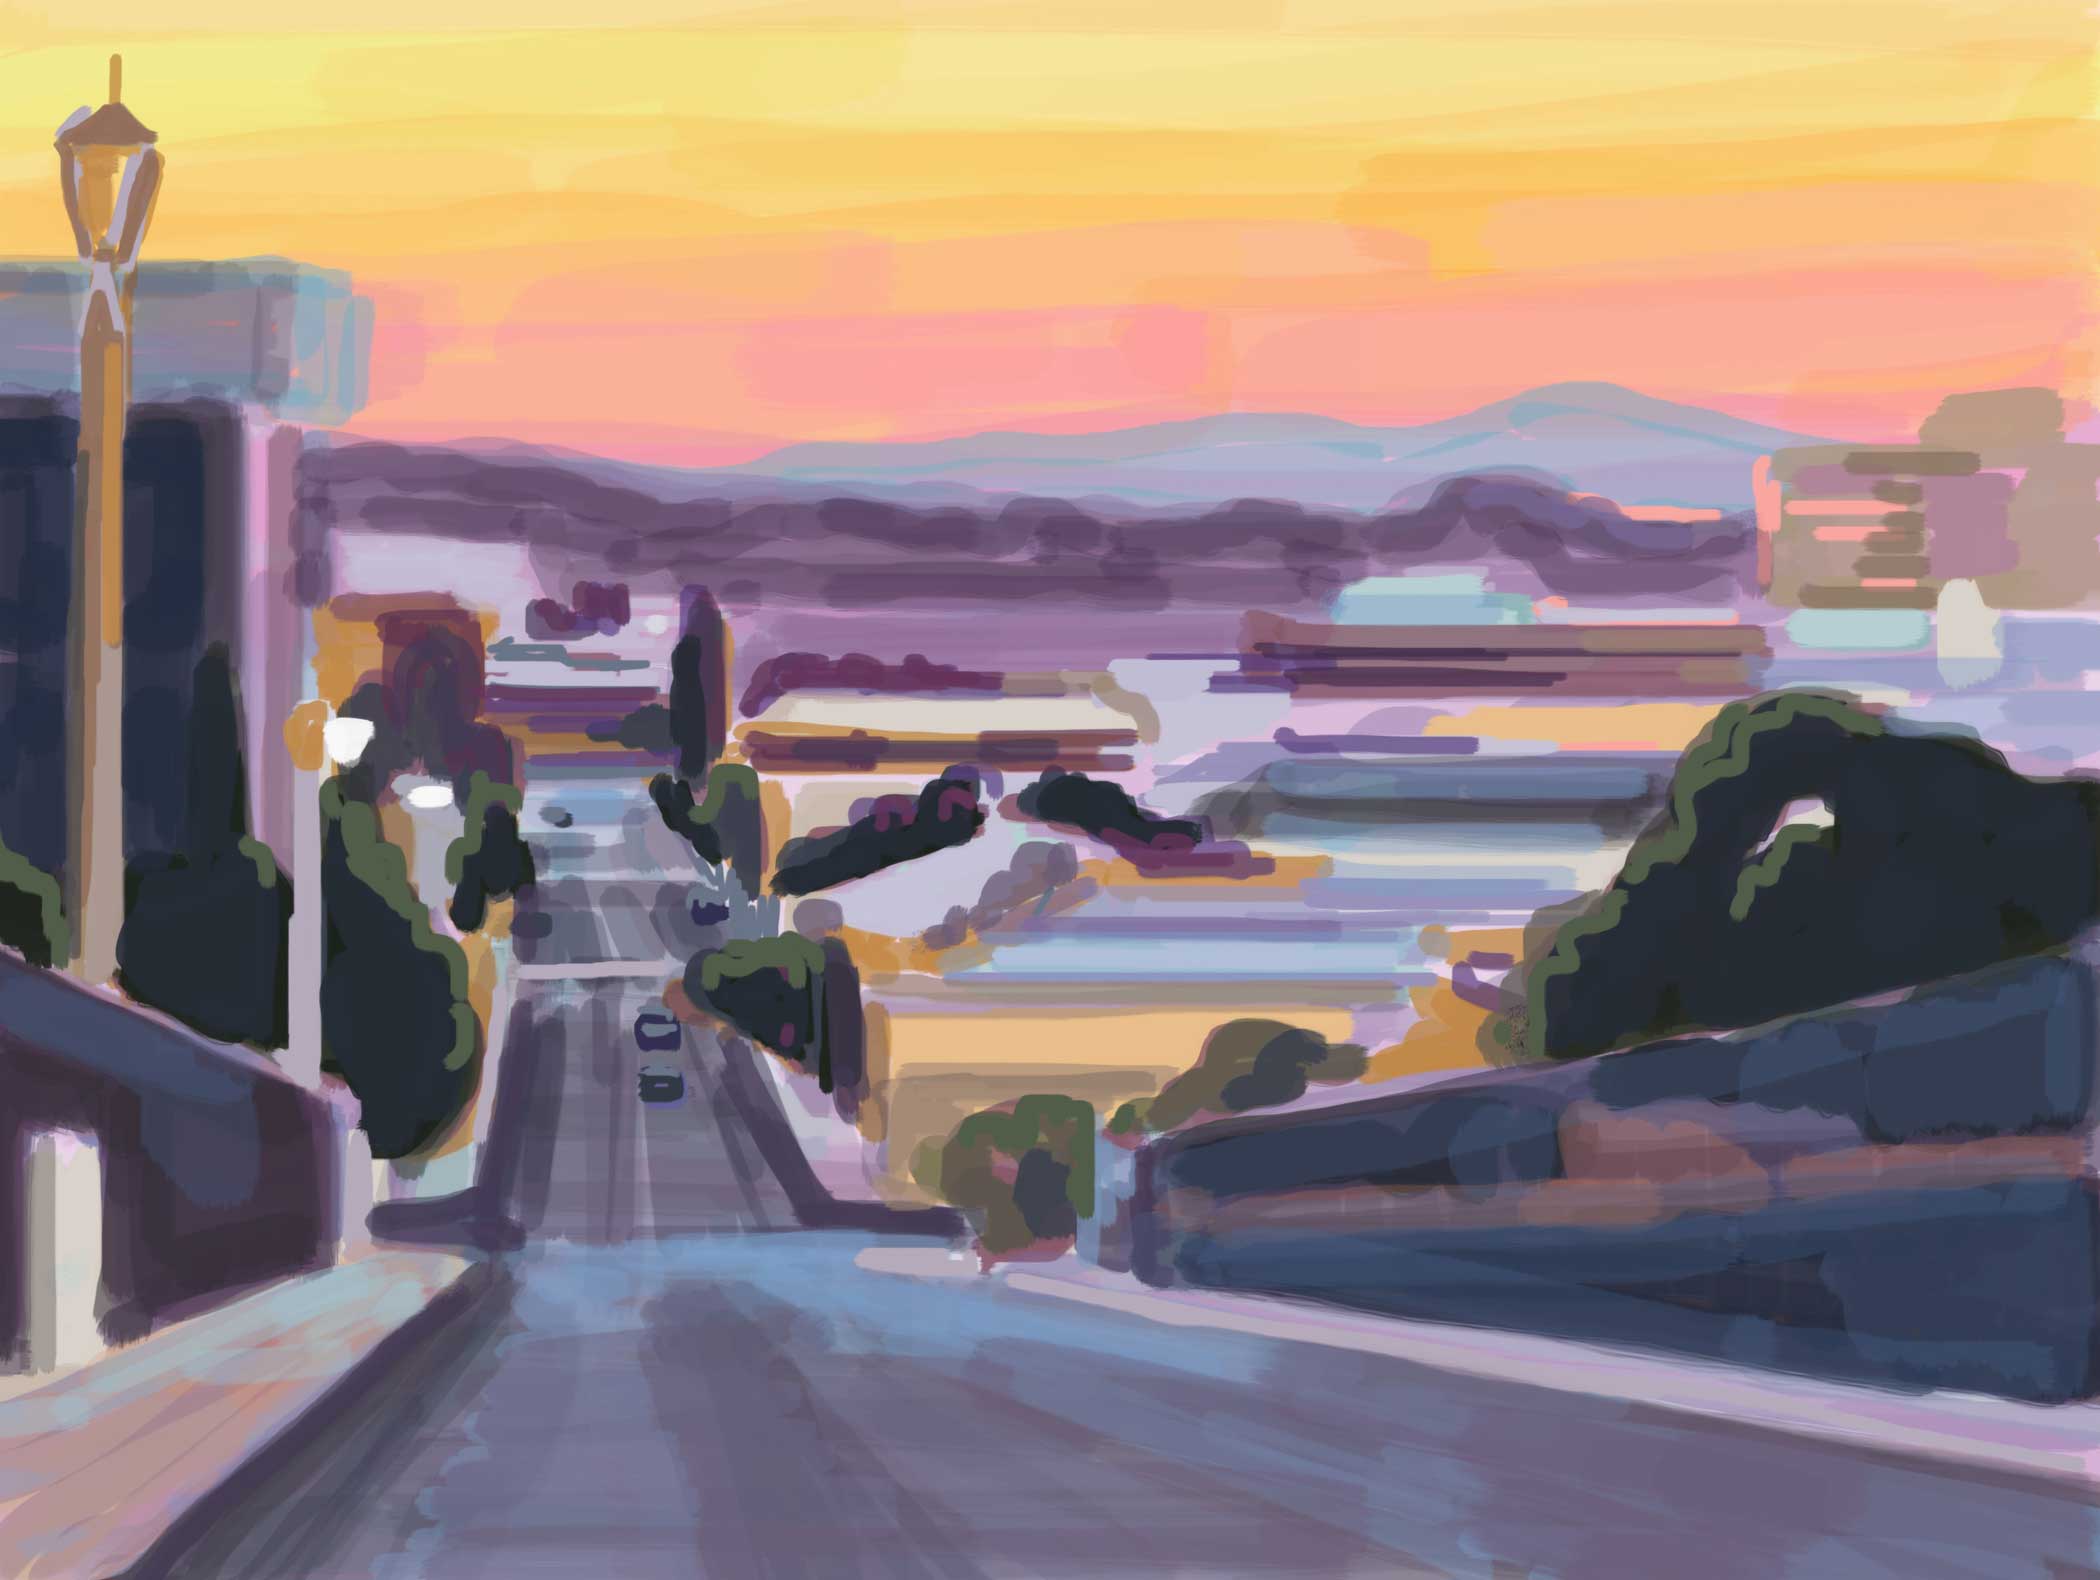 Brian Lotti’s interest in exploring urban landscapes stems from his years as a professional skateboarder. But now, instead of scouring the city for locations to try a new trick, he hunts for colorful new places to paint. In Pico-Union, North, he uses iPad Air 2, the Procreate app, and Pencil by FiftyThree to portray a radiant view of Los Angeles.